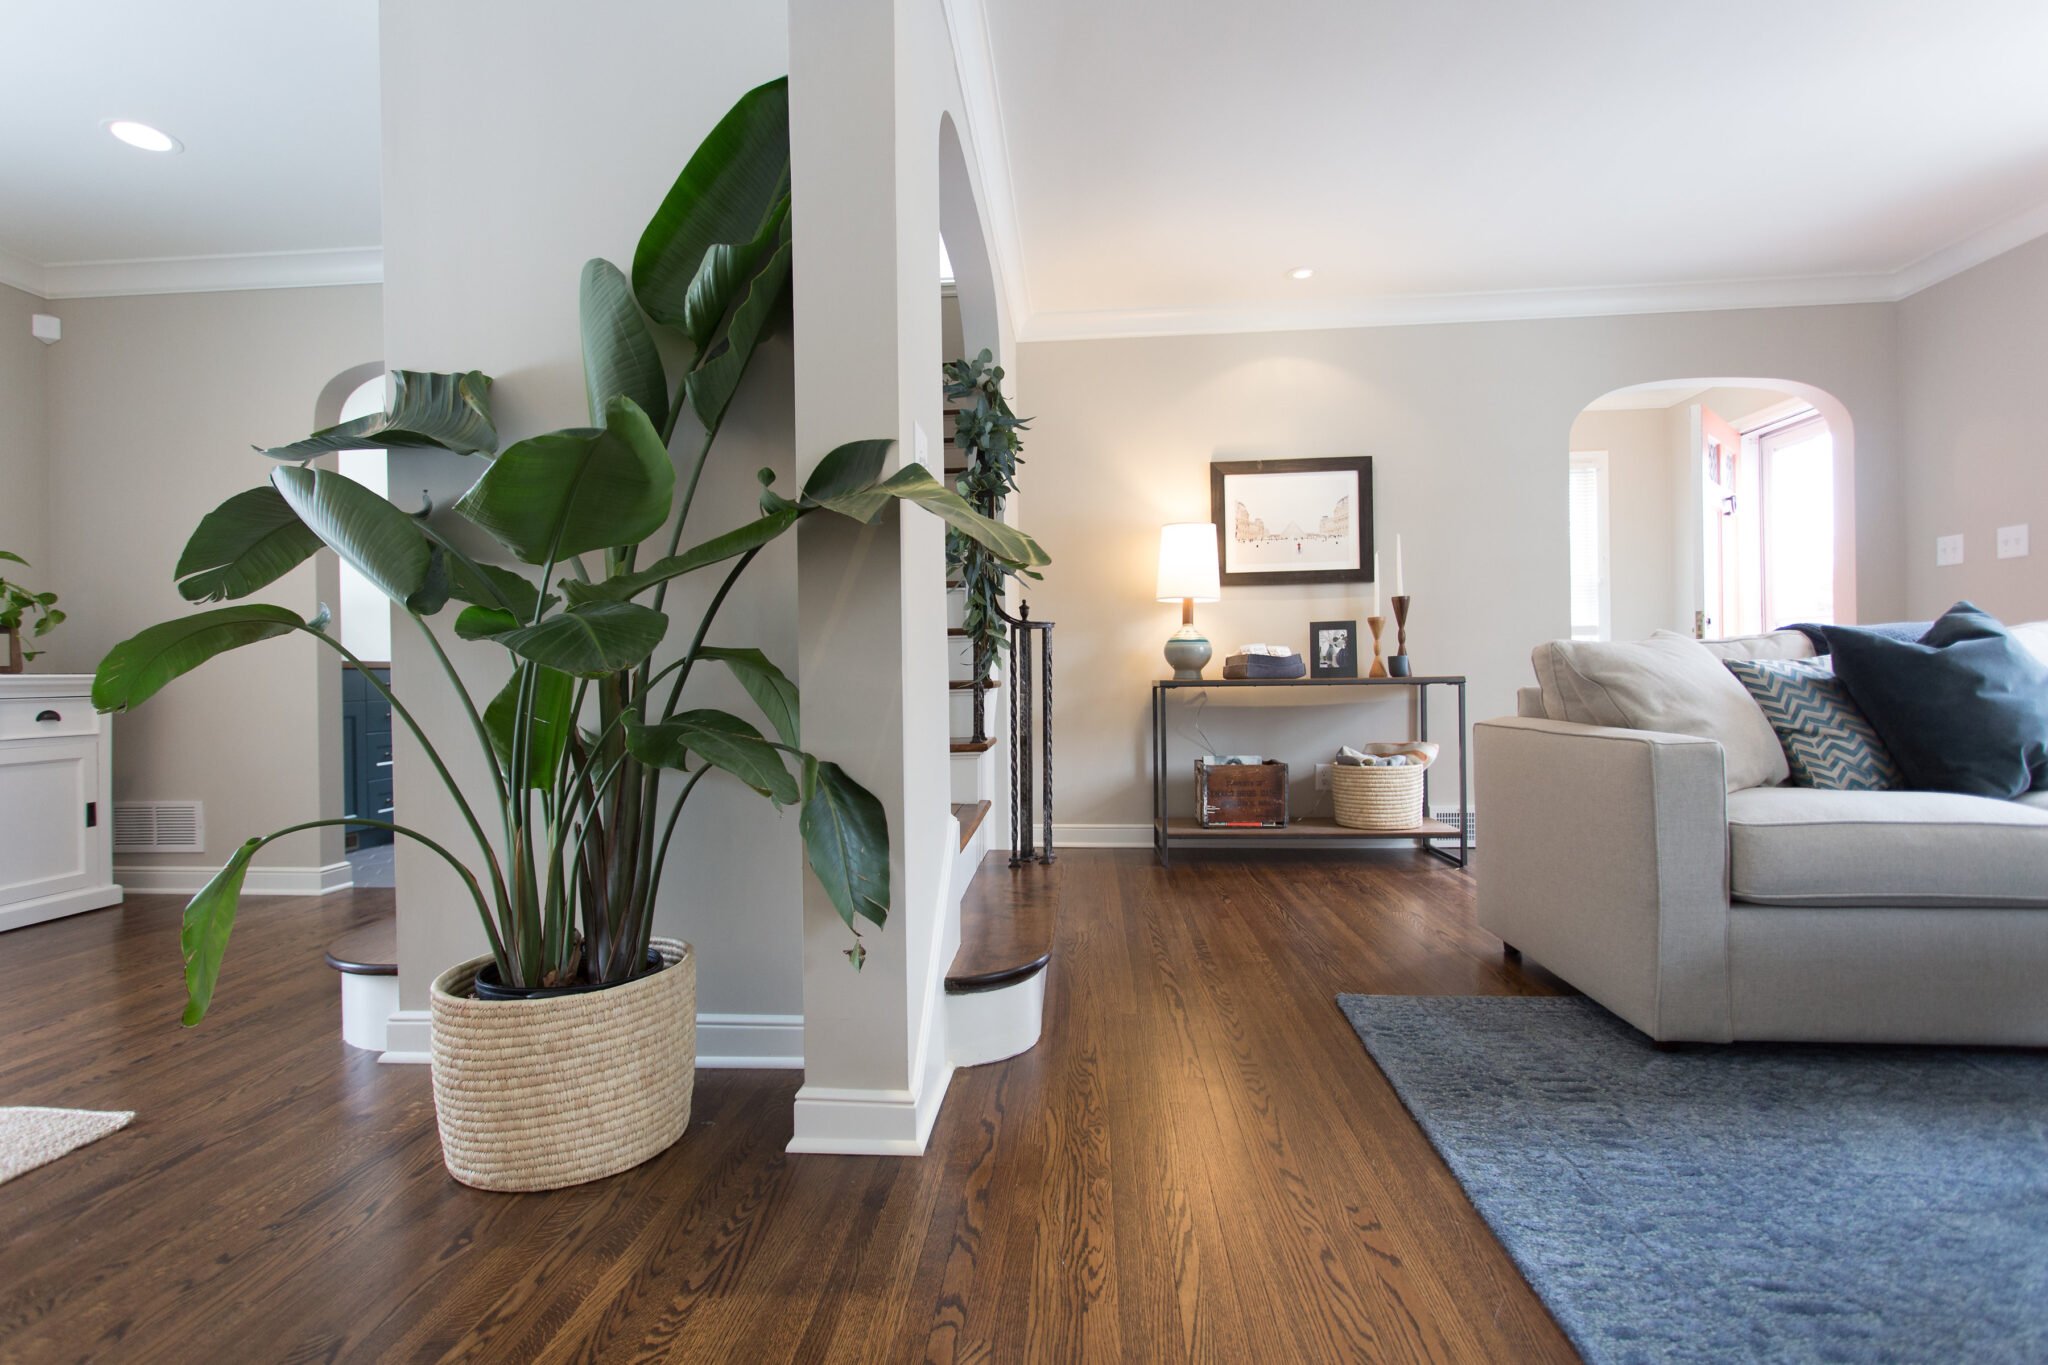 View of living room, console table and large houseplant